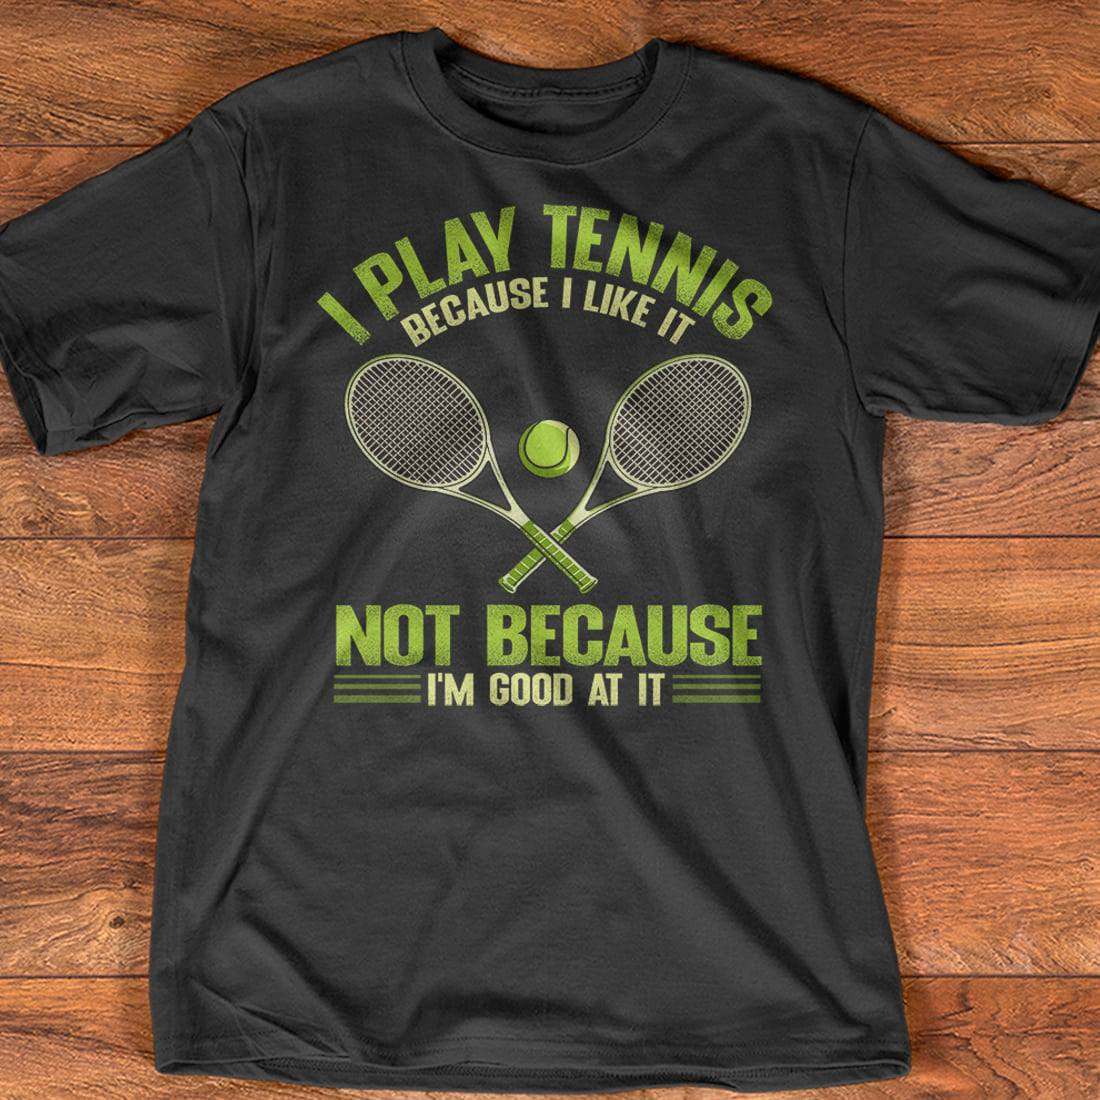 I play tennis because I like it not because I'm good at it - Love playing tennis